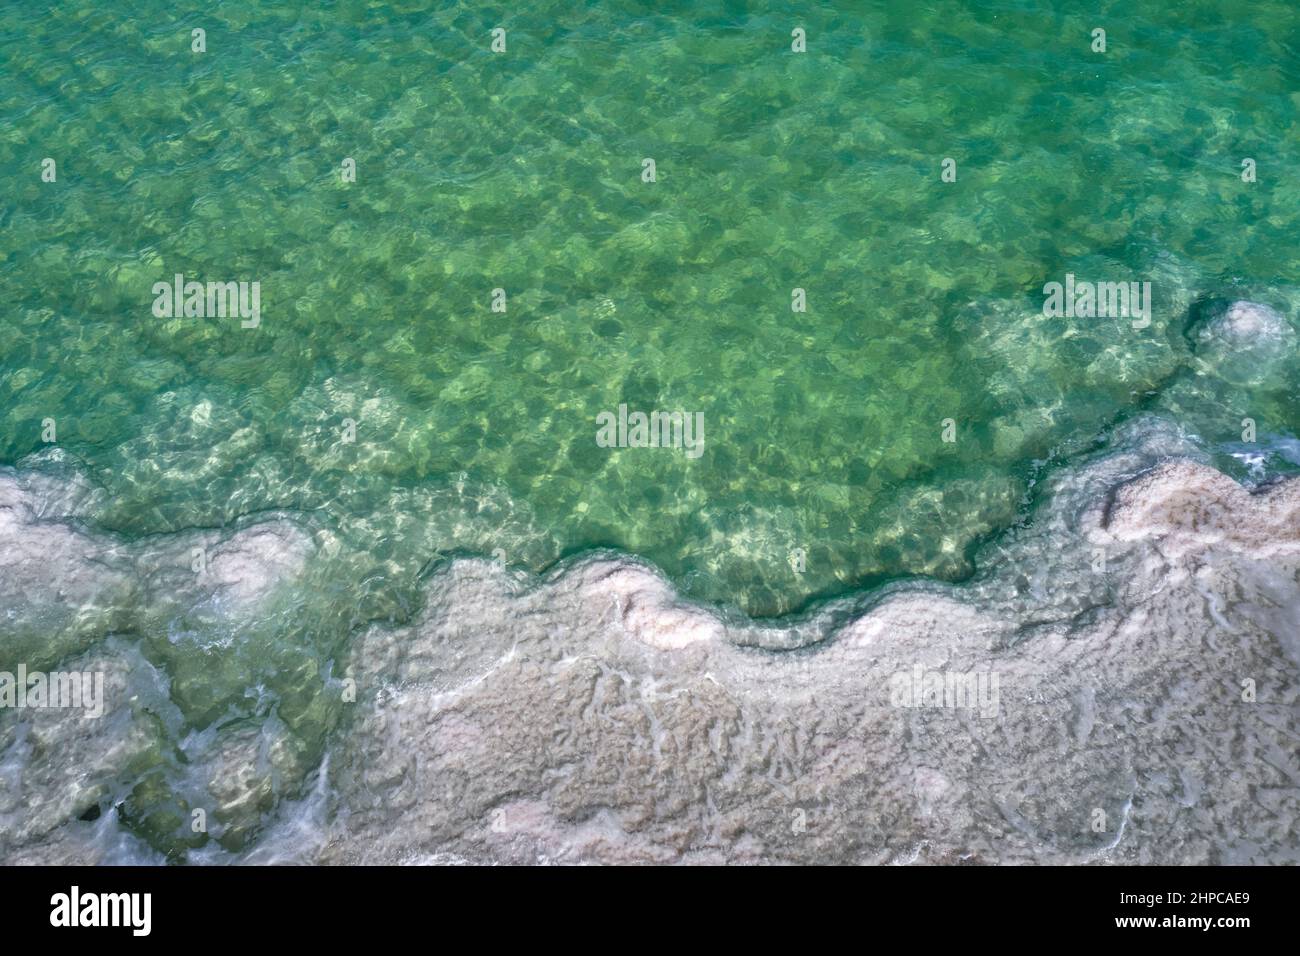 Unique patterns of the Dead sea, Israel. Aerial photography Stock Photo